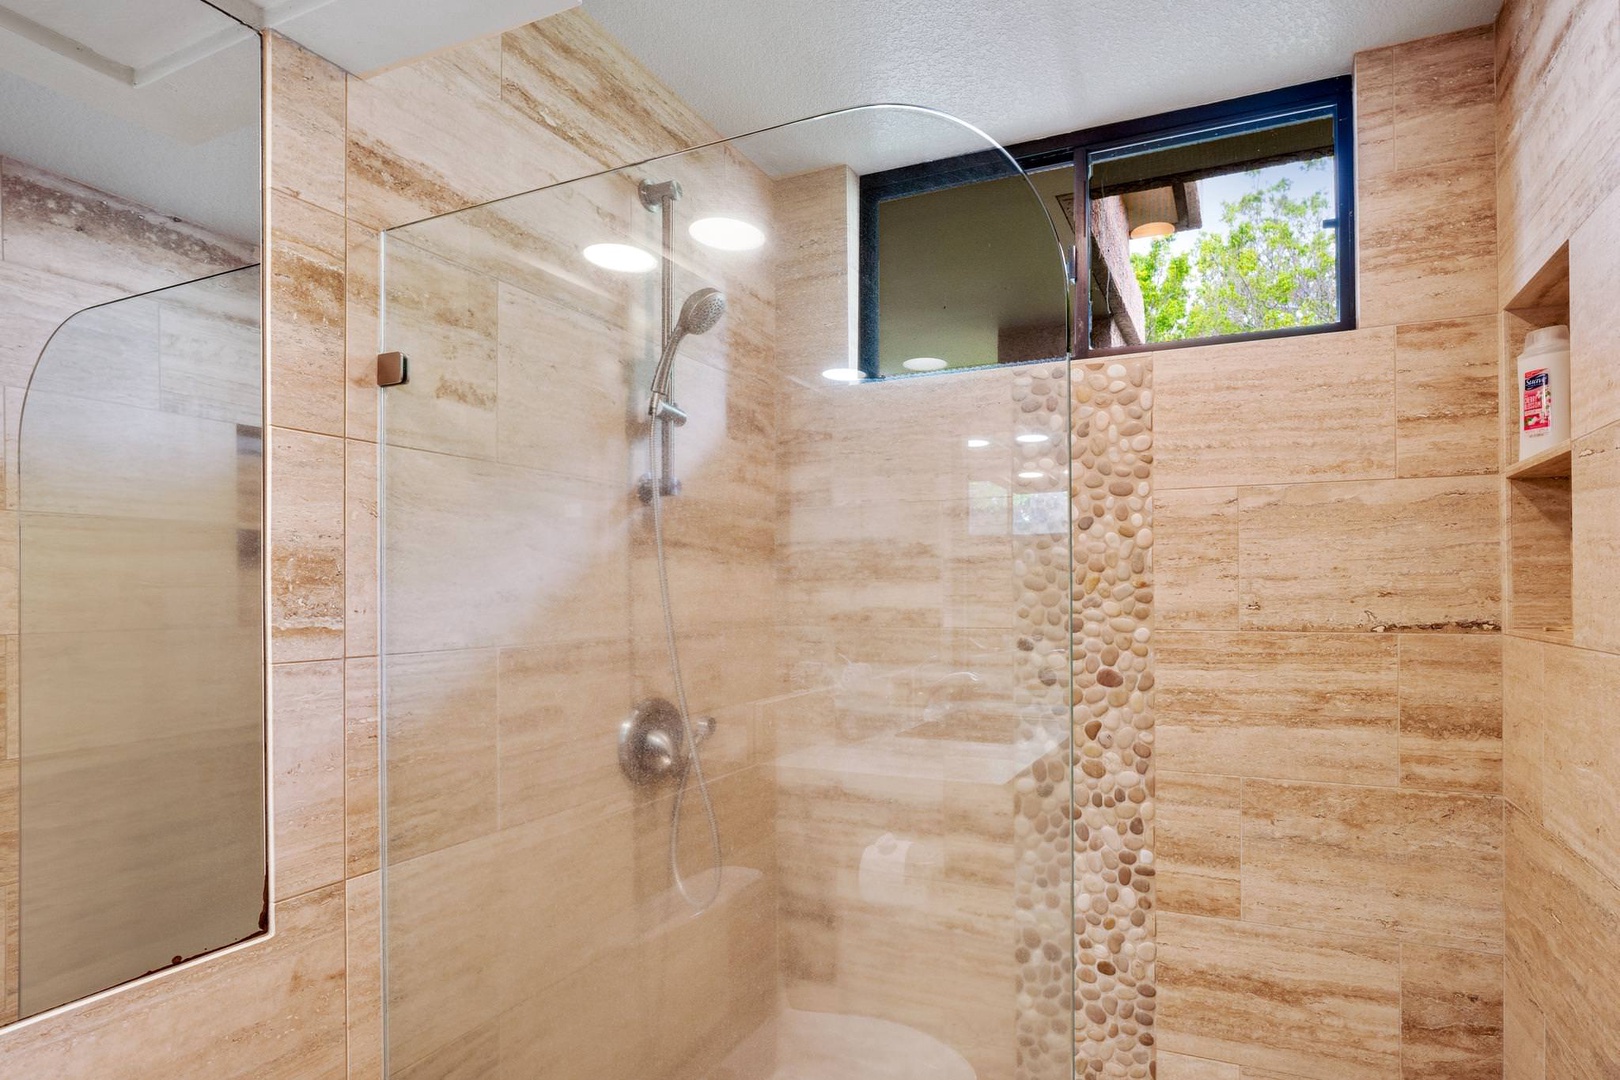 Full bathroom with standing shower